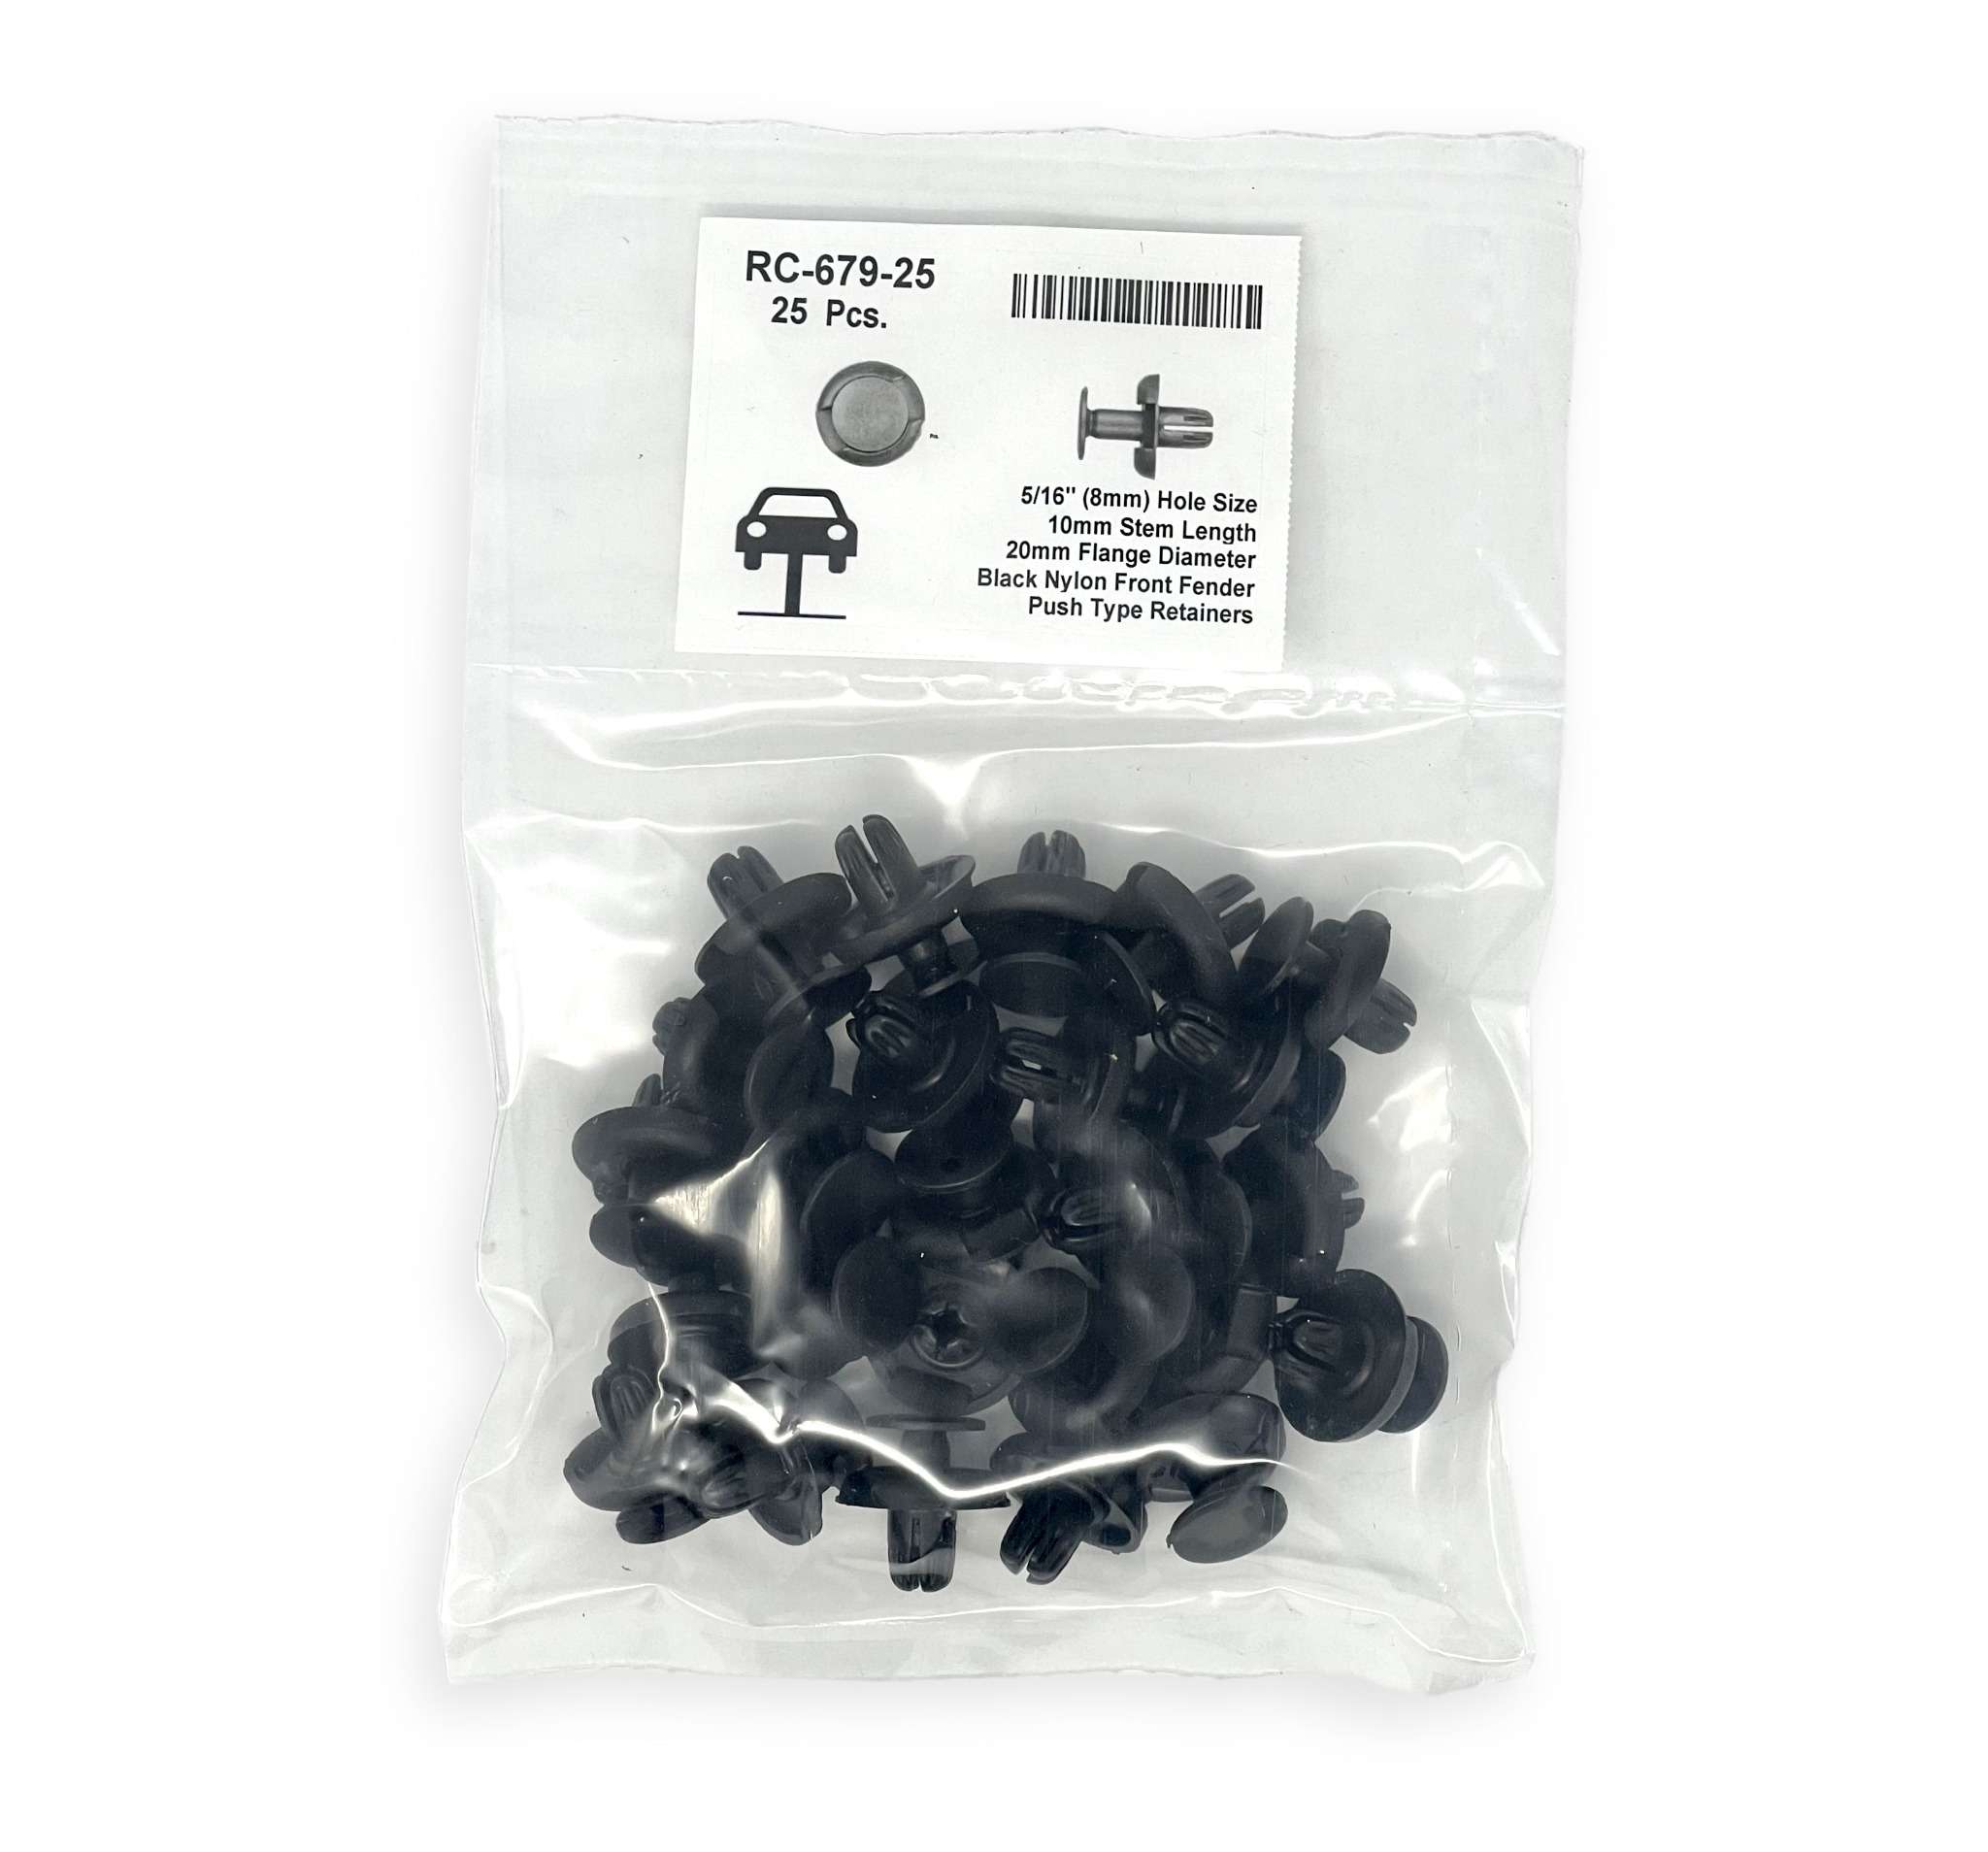 Black Nylon Front Bumper Push Type Retainer Head Diameter 20mm, Stem Length 13mm, Fits Into 10mm Hole (Pack of 25)